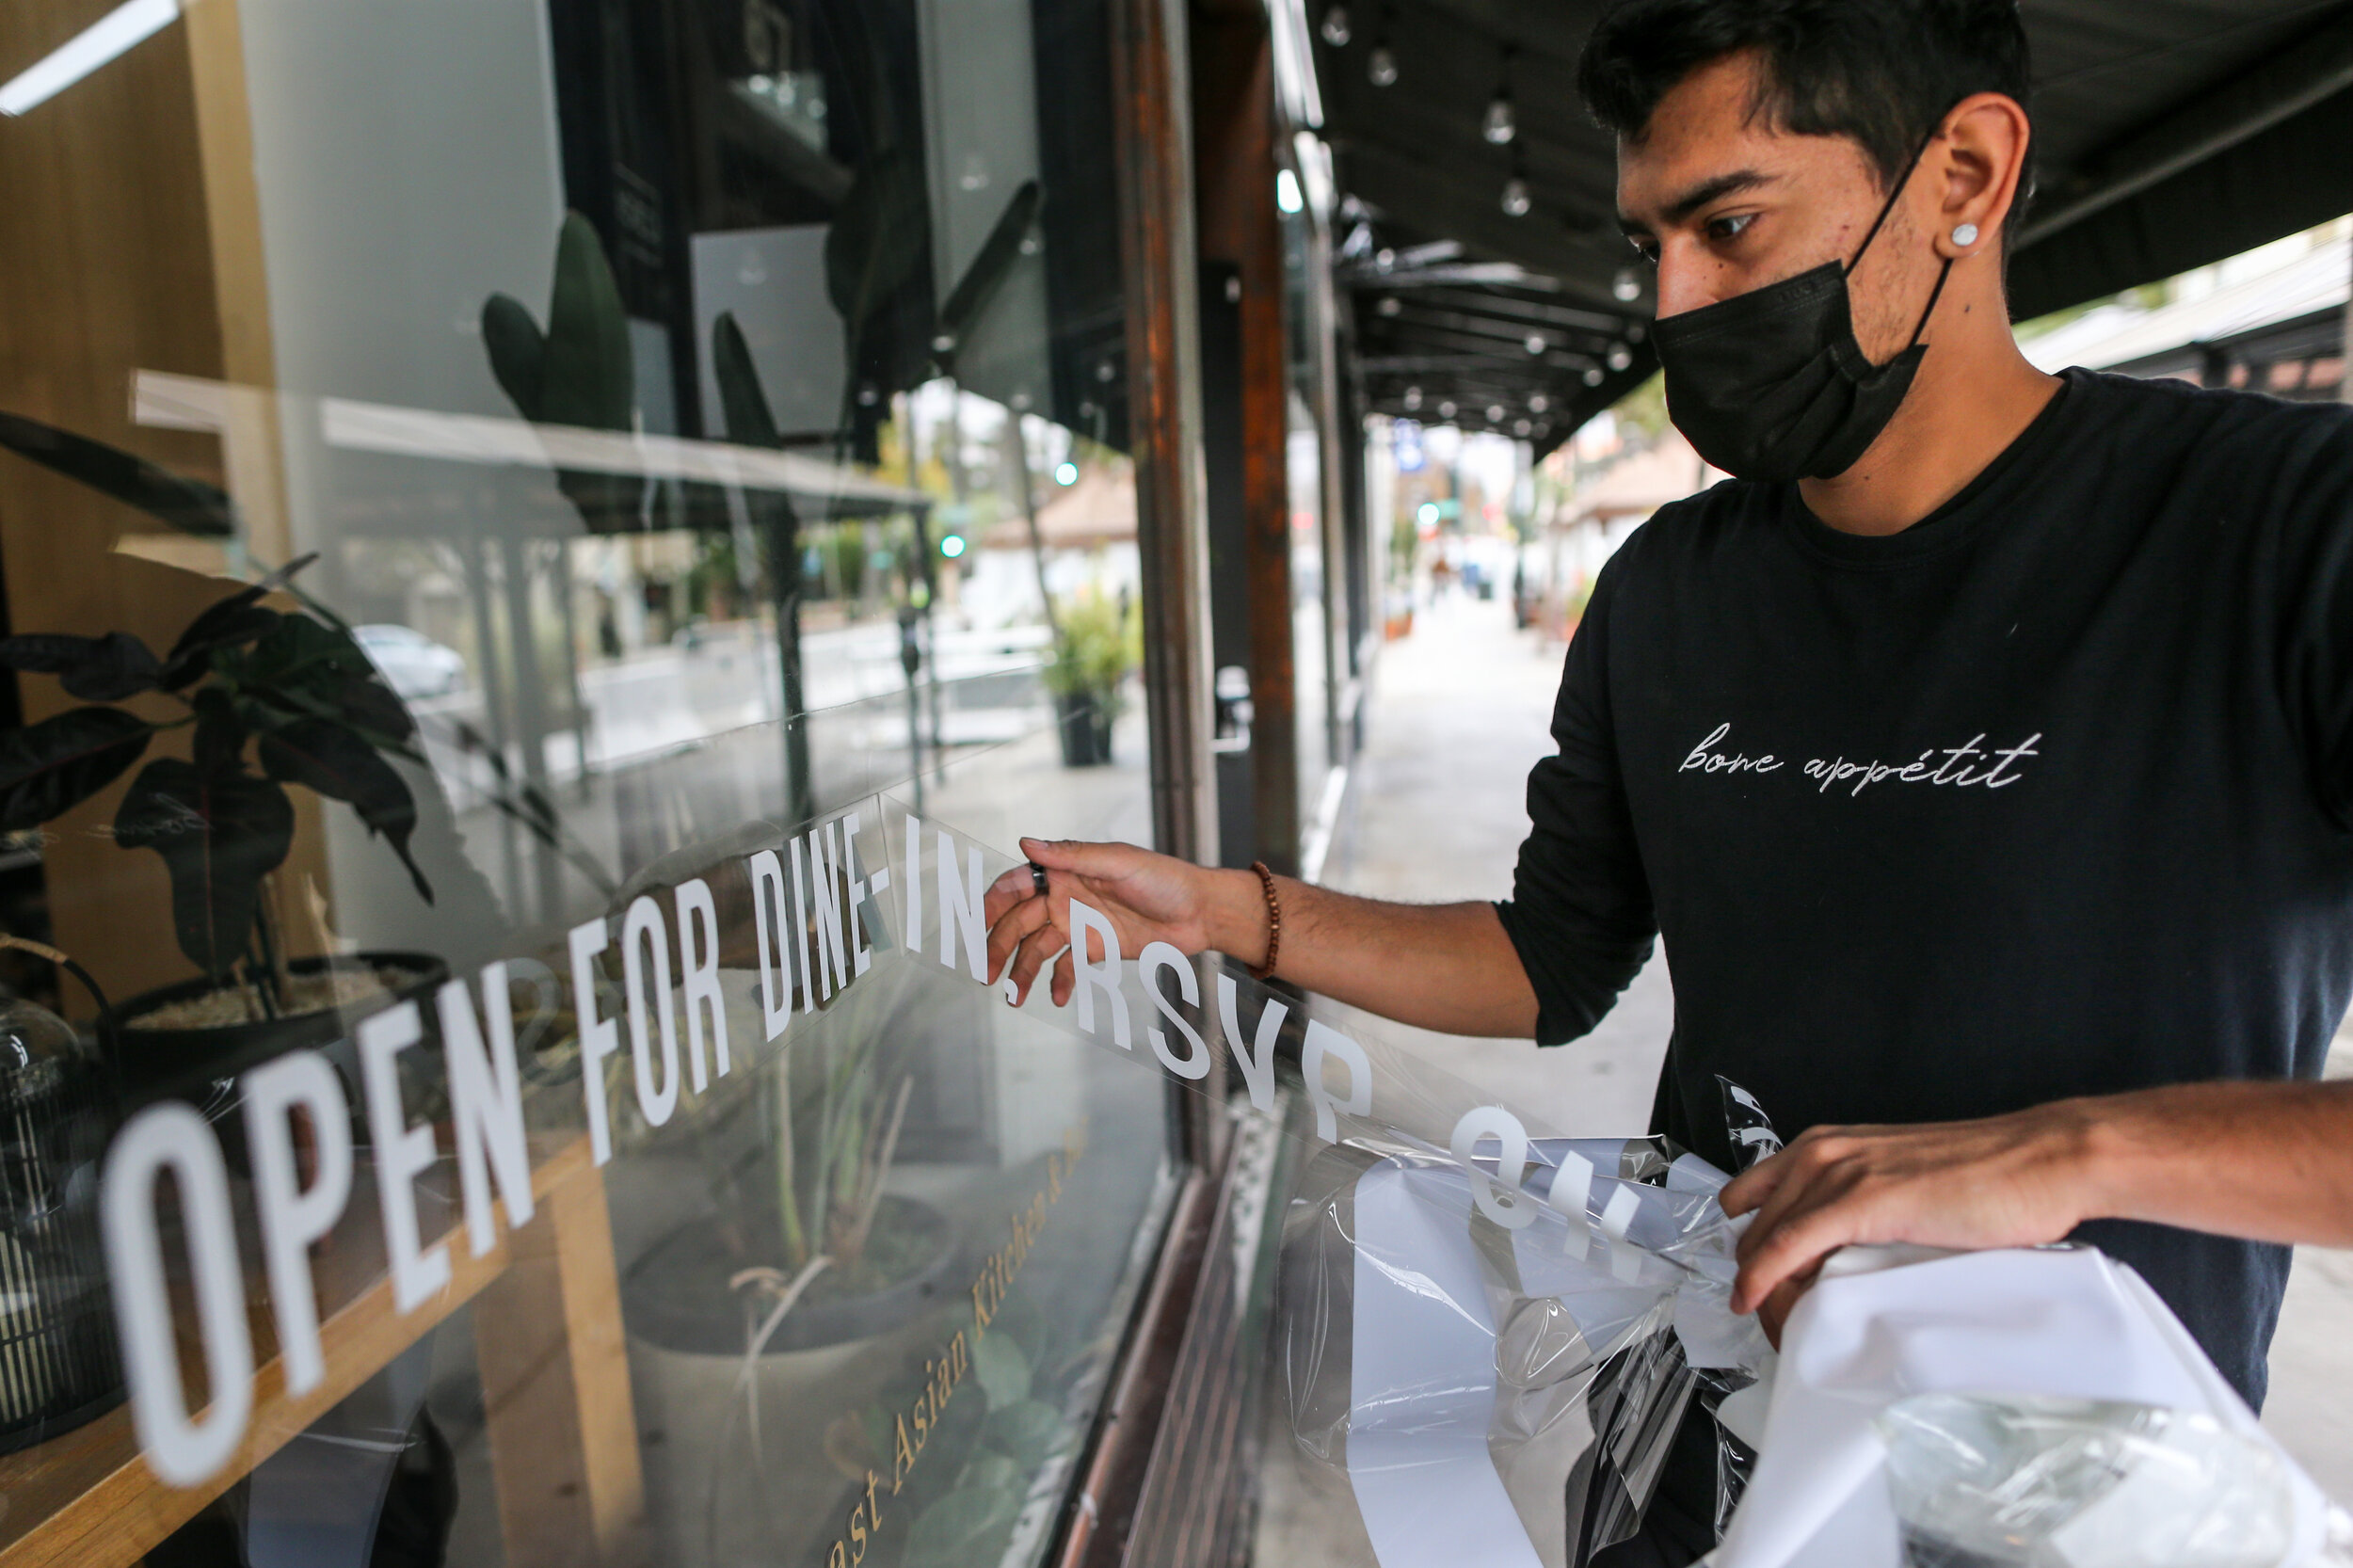  Pasadena, CA, Monday, Dec. 7, 2020 - Bone Kettle employee Joe Delgado removes a “we’re open for dine in” decal from the front window of the restaurant as state mandated covid-19 restrictions forbid outdoor dining.  A Bloomberg News article reported 